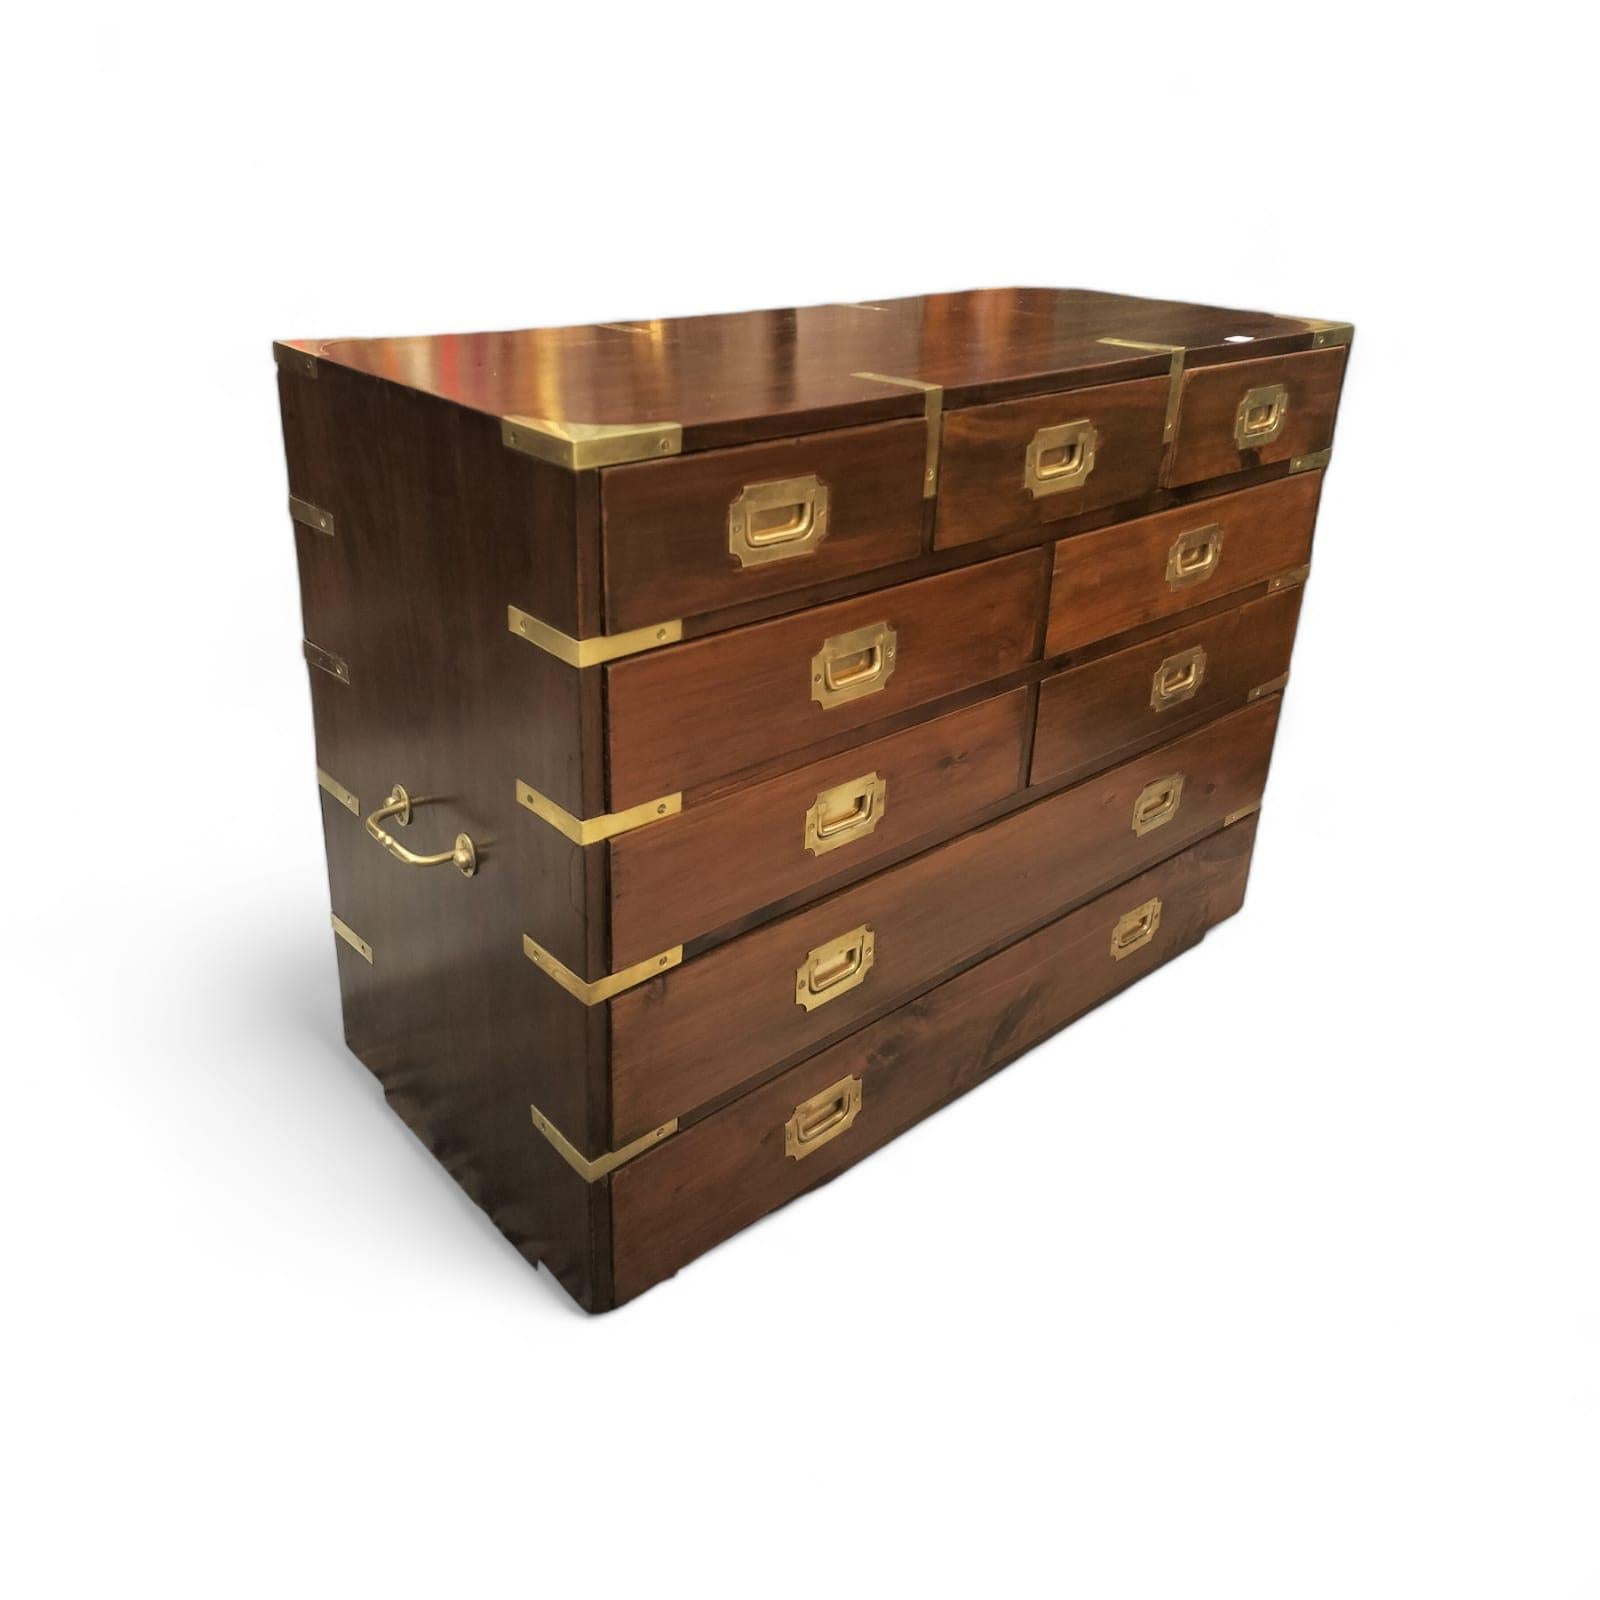 This stunning mahogany chest of drawers model was originally used by the British navy. It features charming typical campaign handles as well two carrying handles on both its sides. 

The size of this piece, measuring 66 cm in width and 49.3 cm in